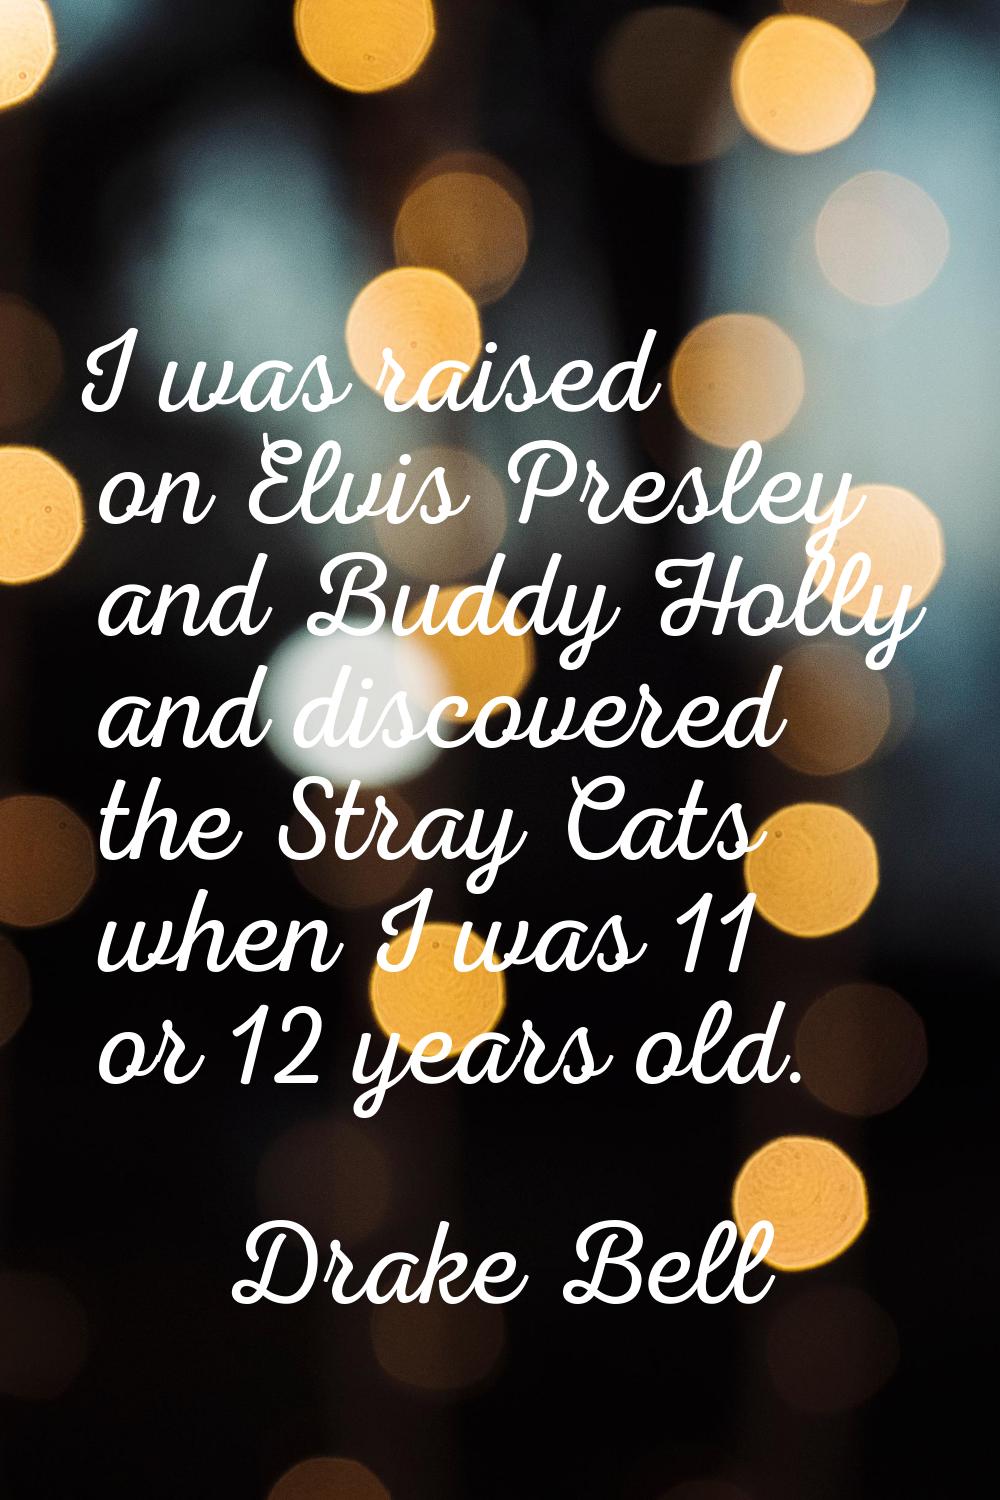 I was raised on Elvis Presley and Buddy Holly and discovered the Stray Cats when I was 11 or 12 yea